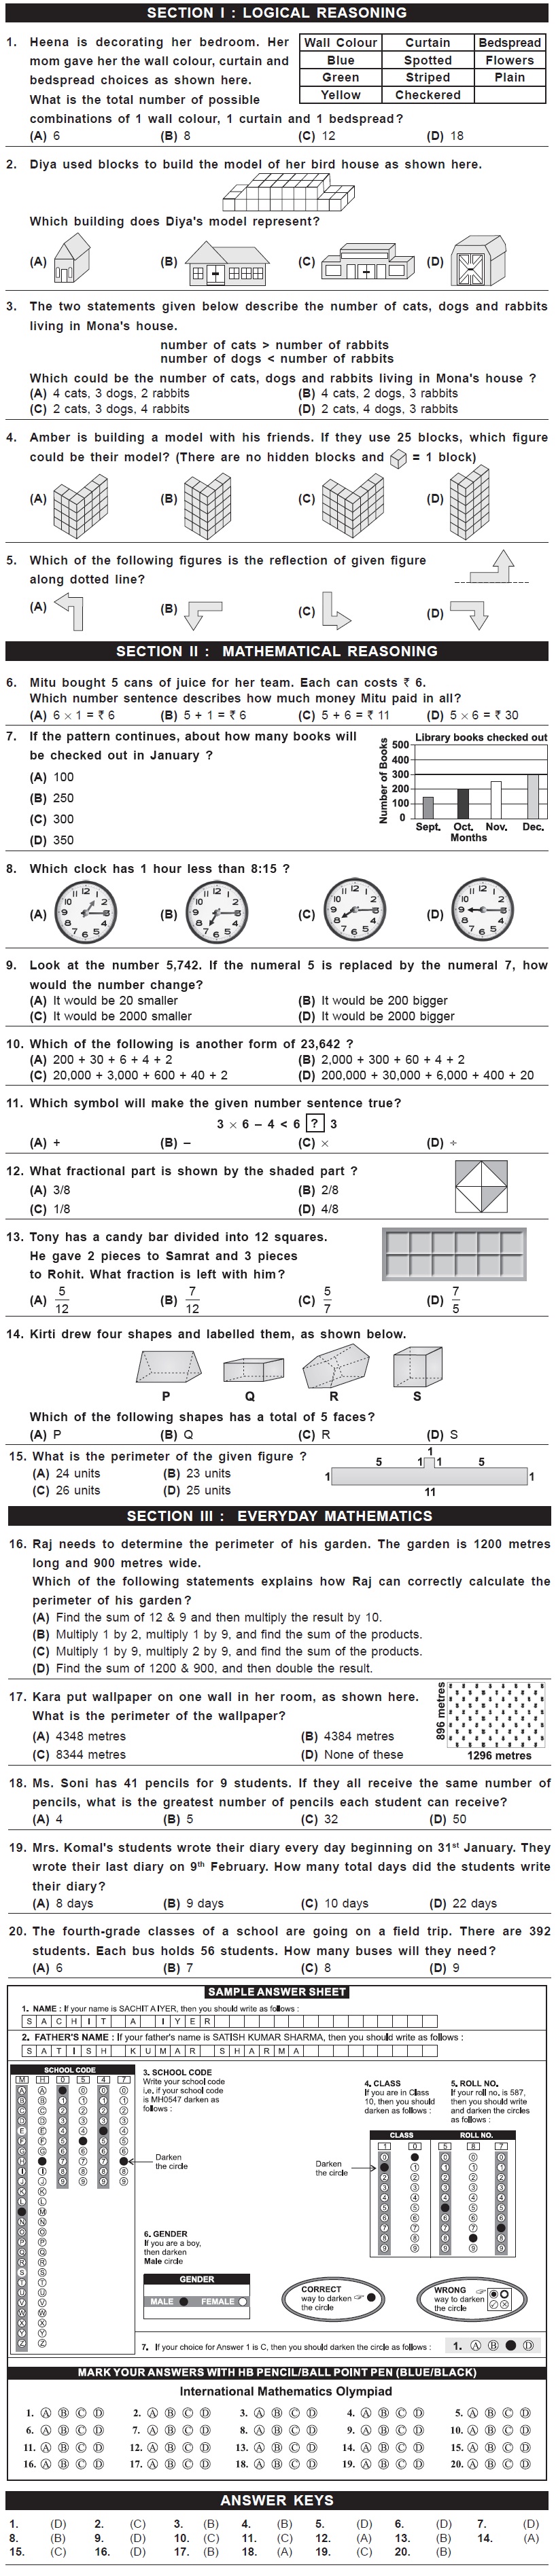 IMO 2nd Level Sample Papers - Class 4